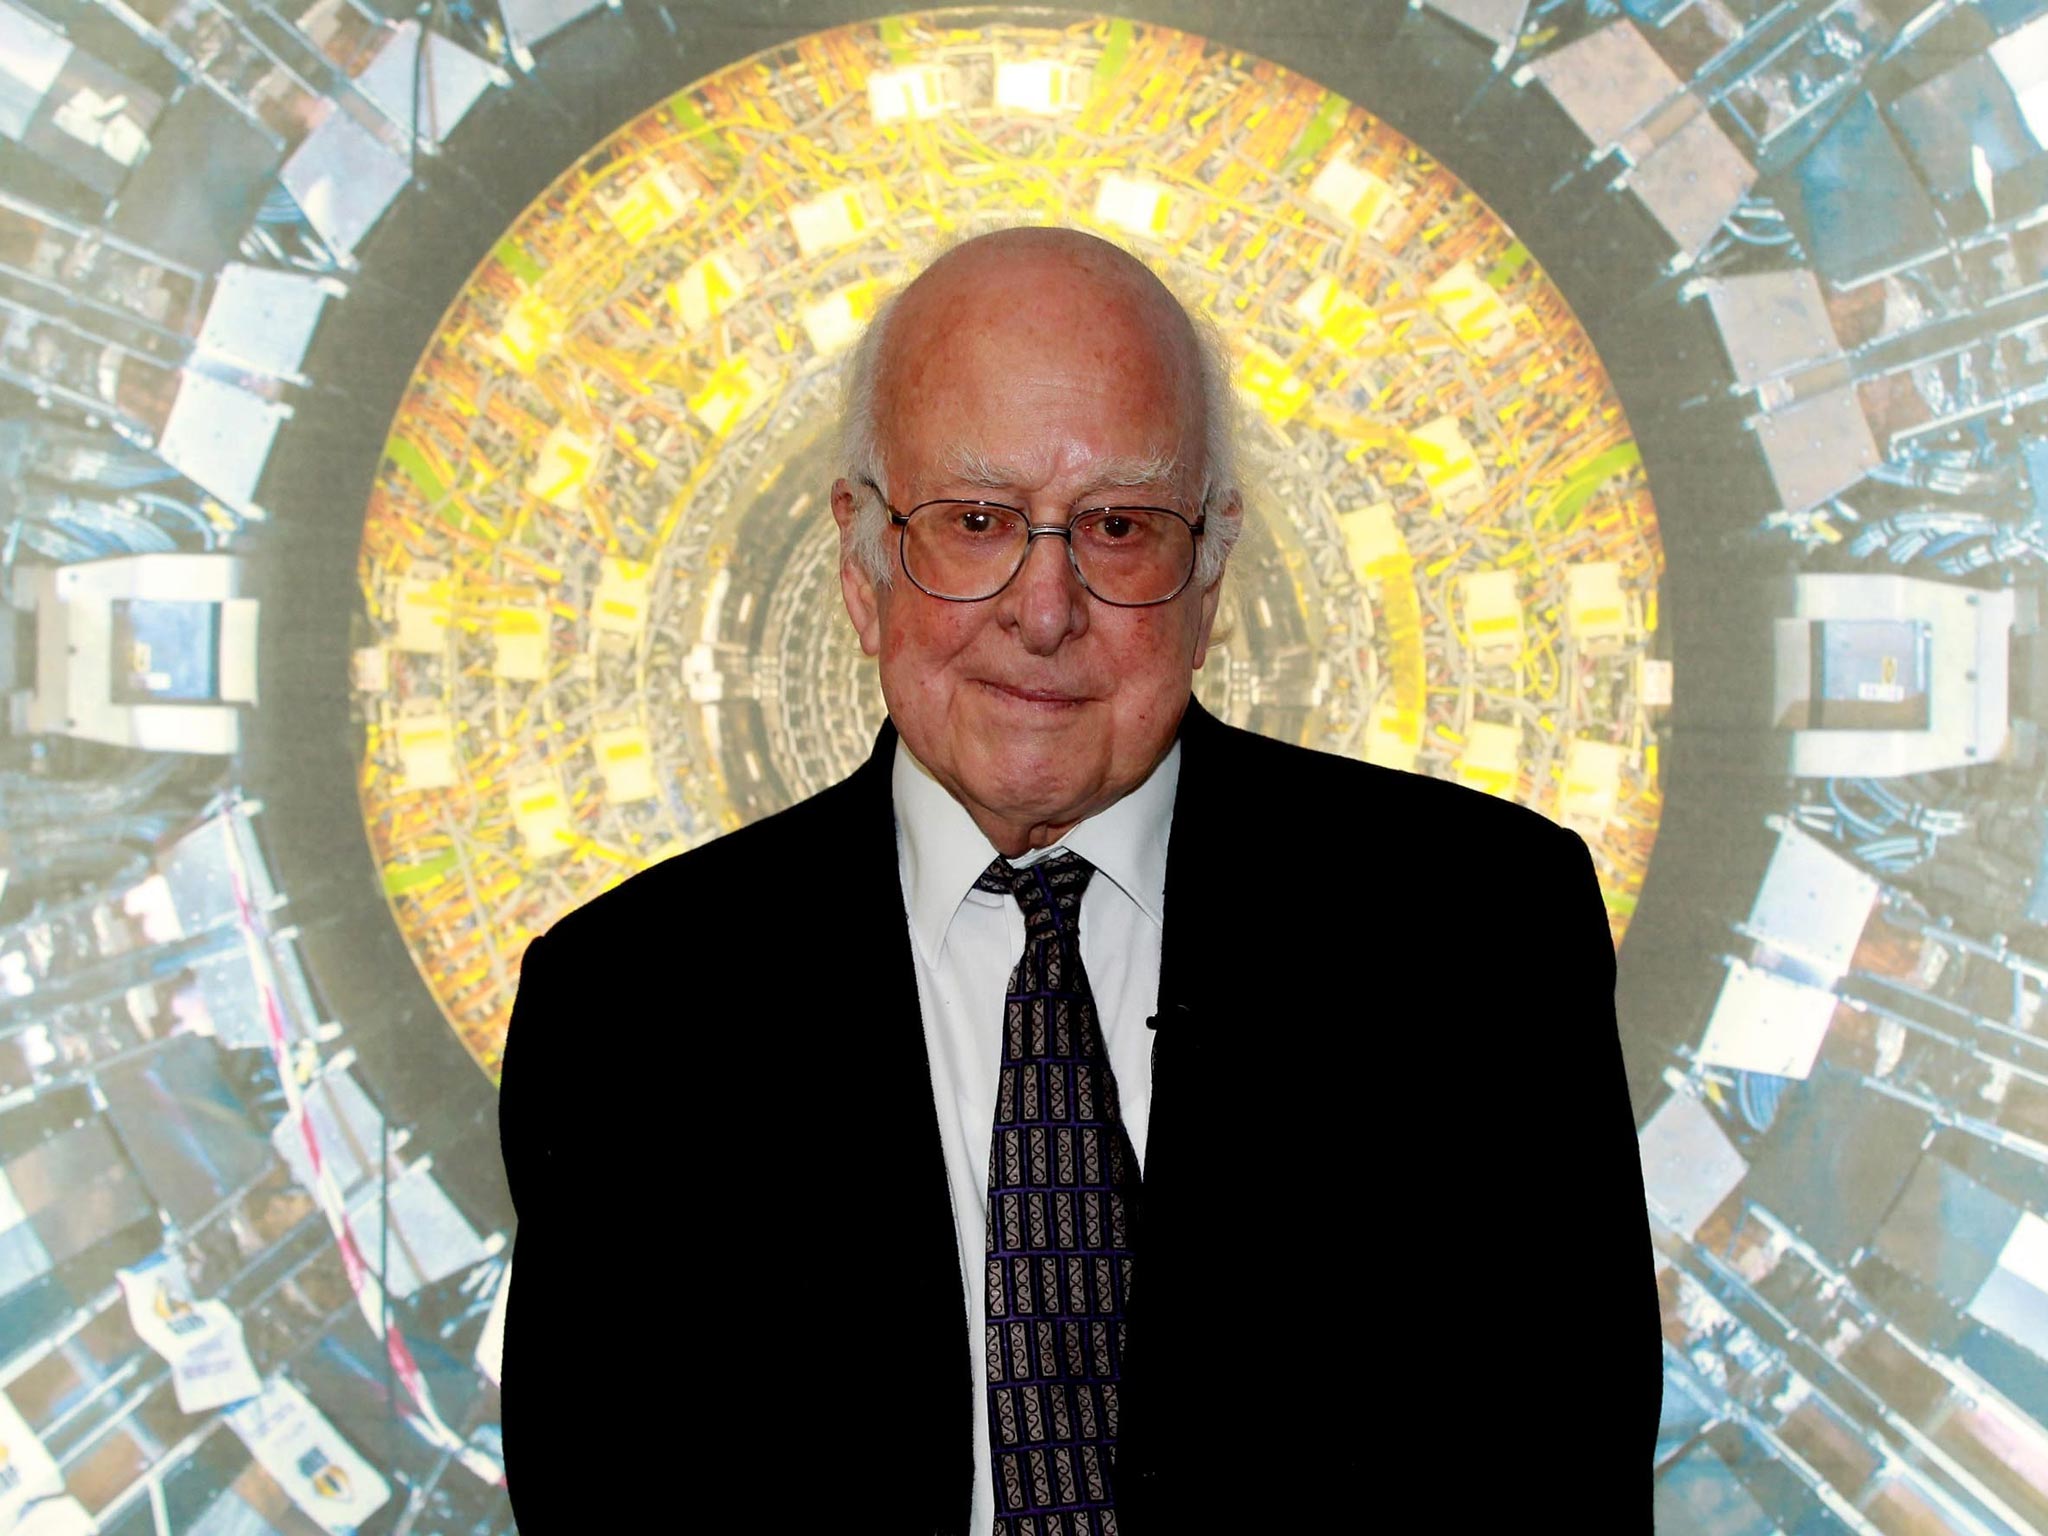 Nobel laureate Professor Peter Higgs at the Science Museum, London, ahead of the opening of the the museum's new "Collider" exhibition, which gives visitors a behind-the-scenes look at the Large Hadron Collider (LHC) and Cern particle physics laboratory in Geneva